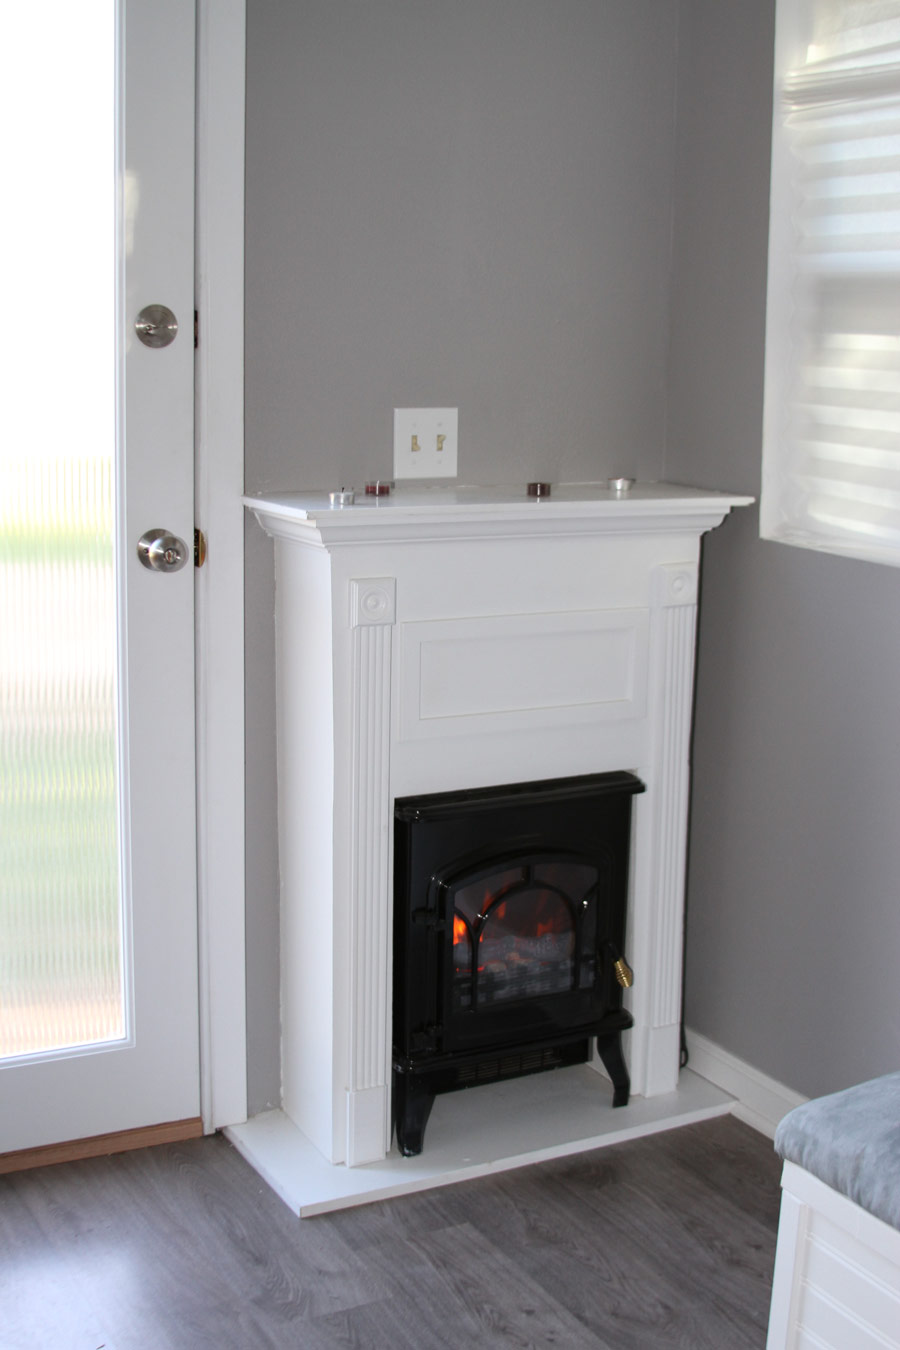 Decorative Electric Fireplaces Inspirational Pin by Linda Wallace On Decorating Country Cottage In